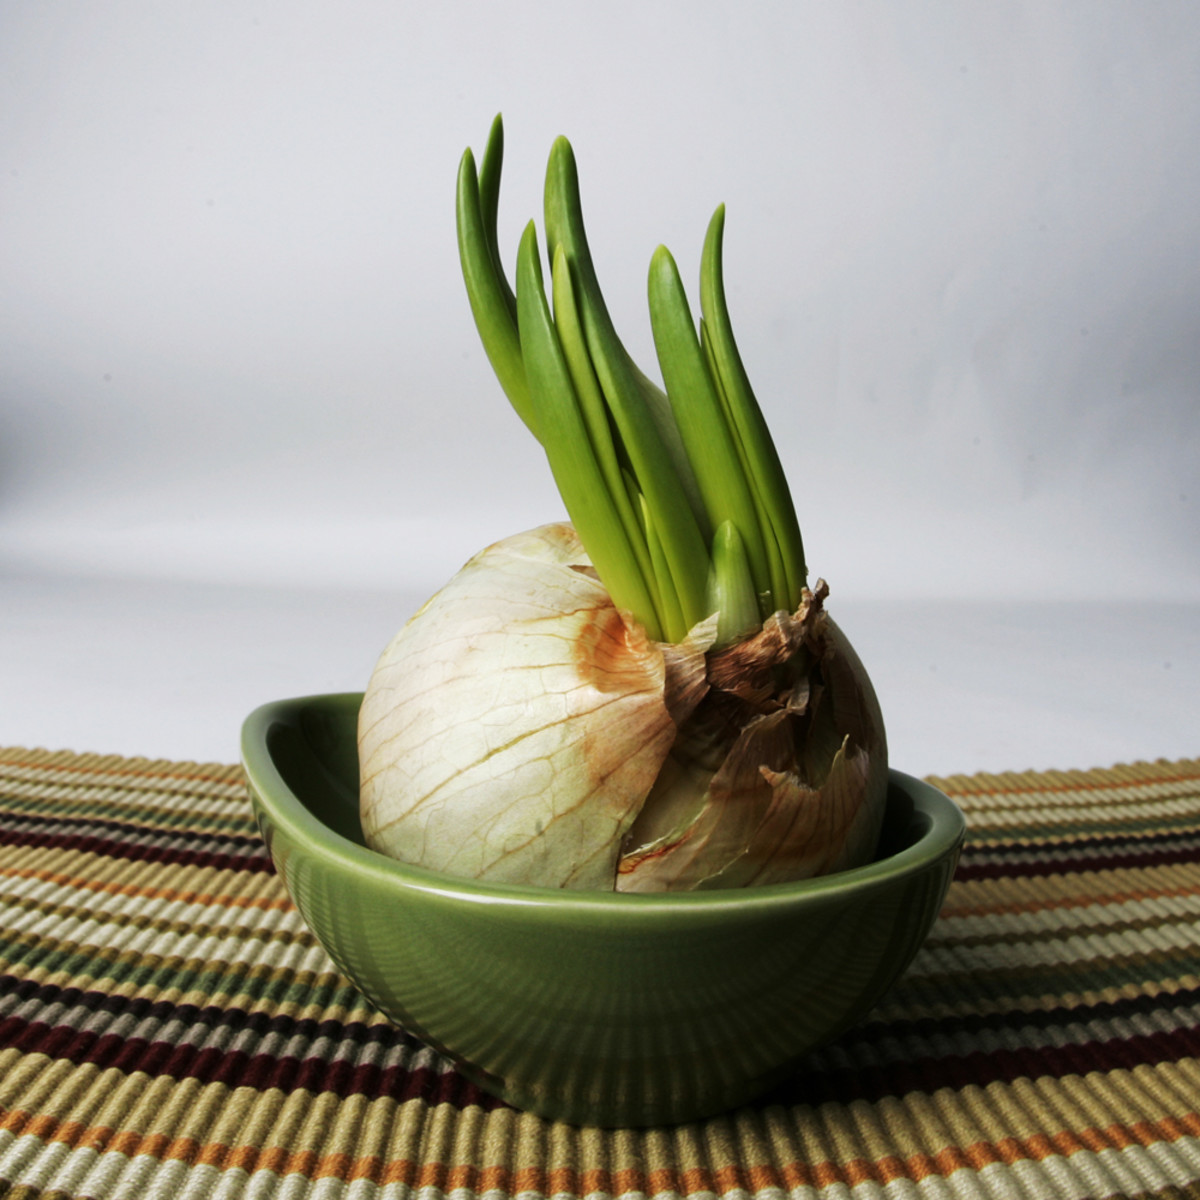 Is it safe to eat a sprouted garlic?